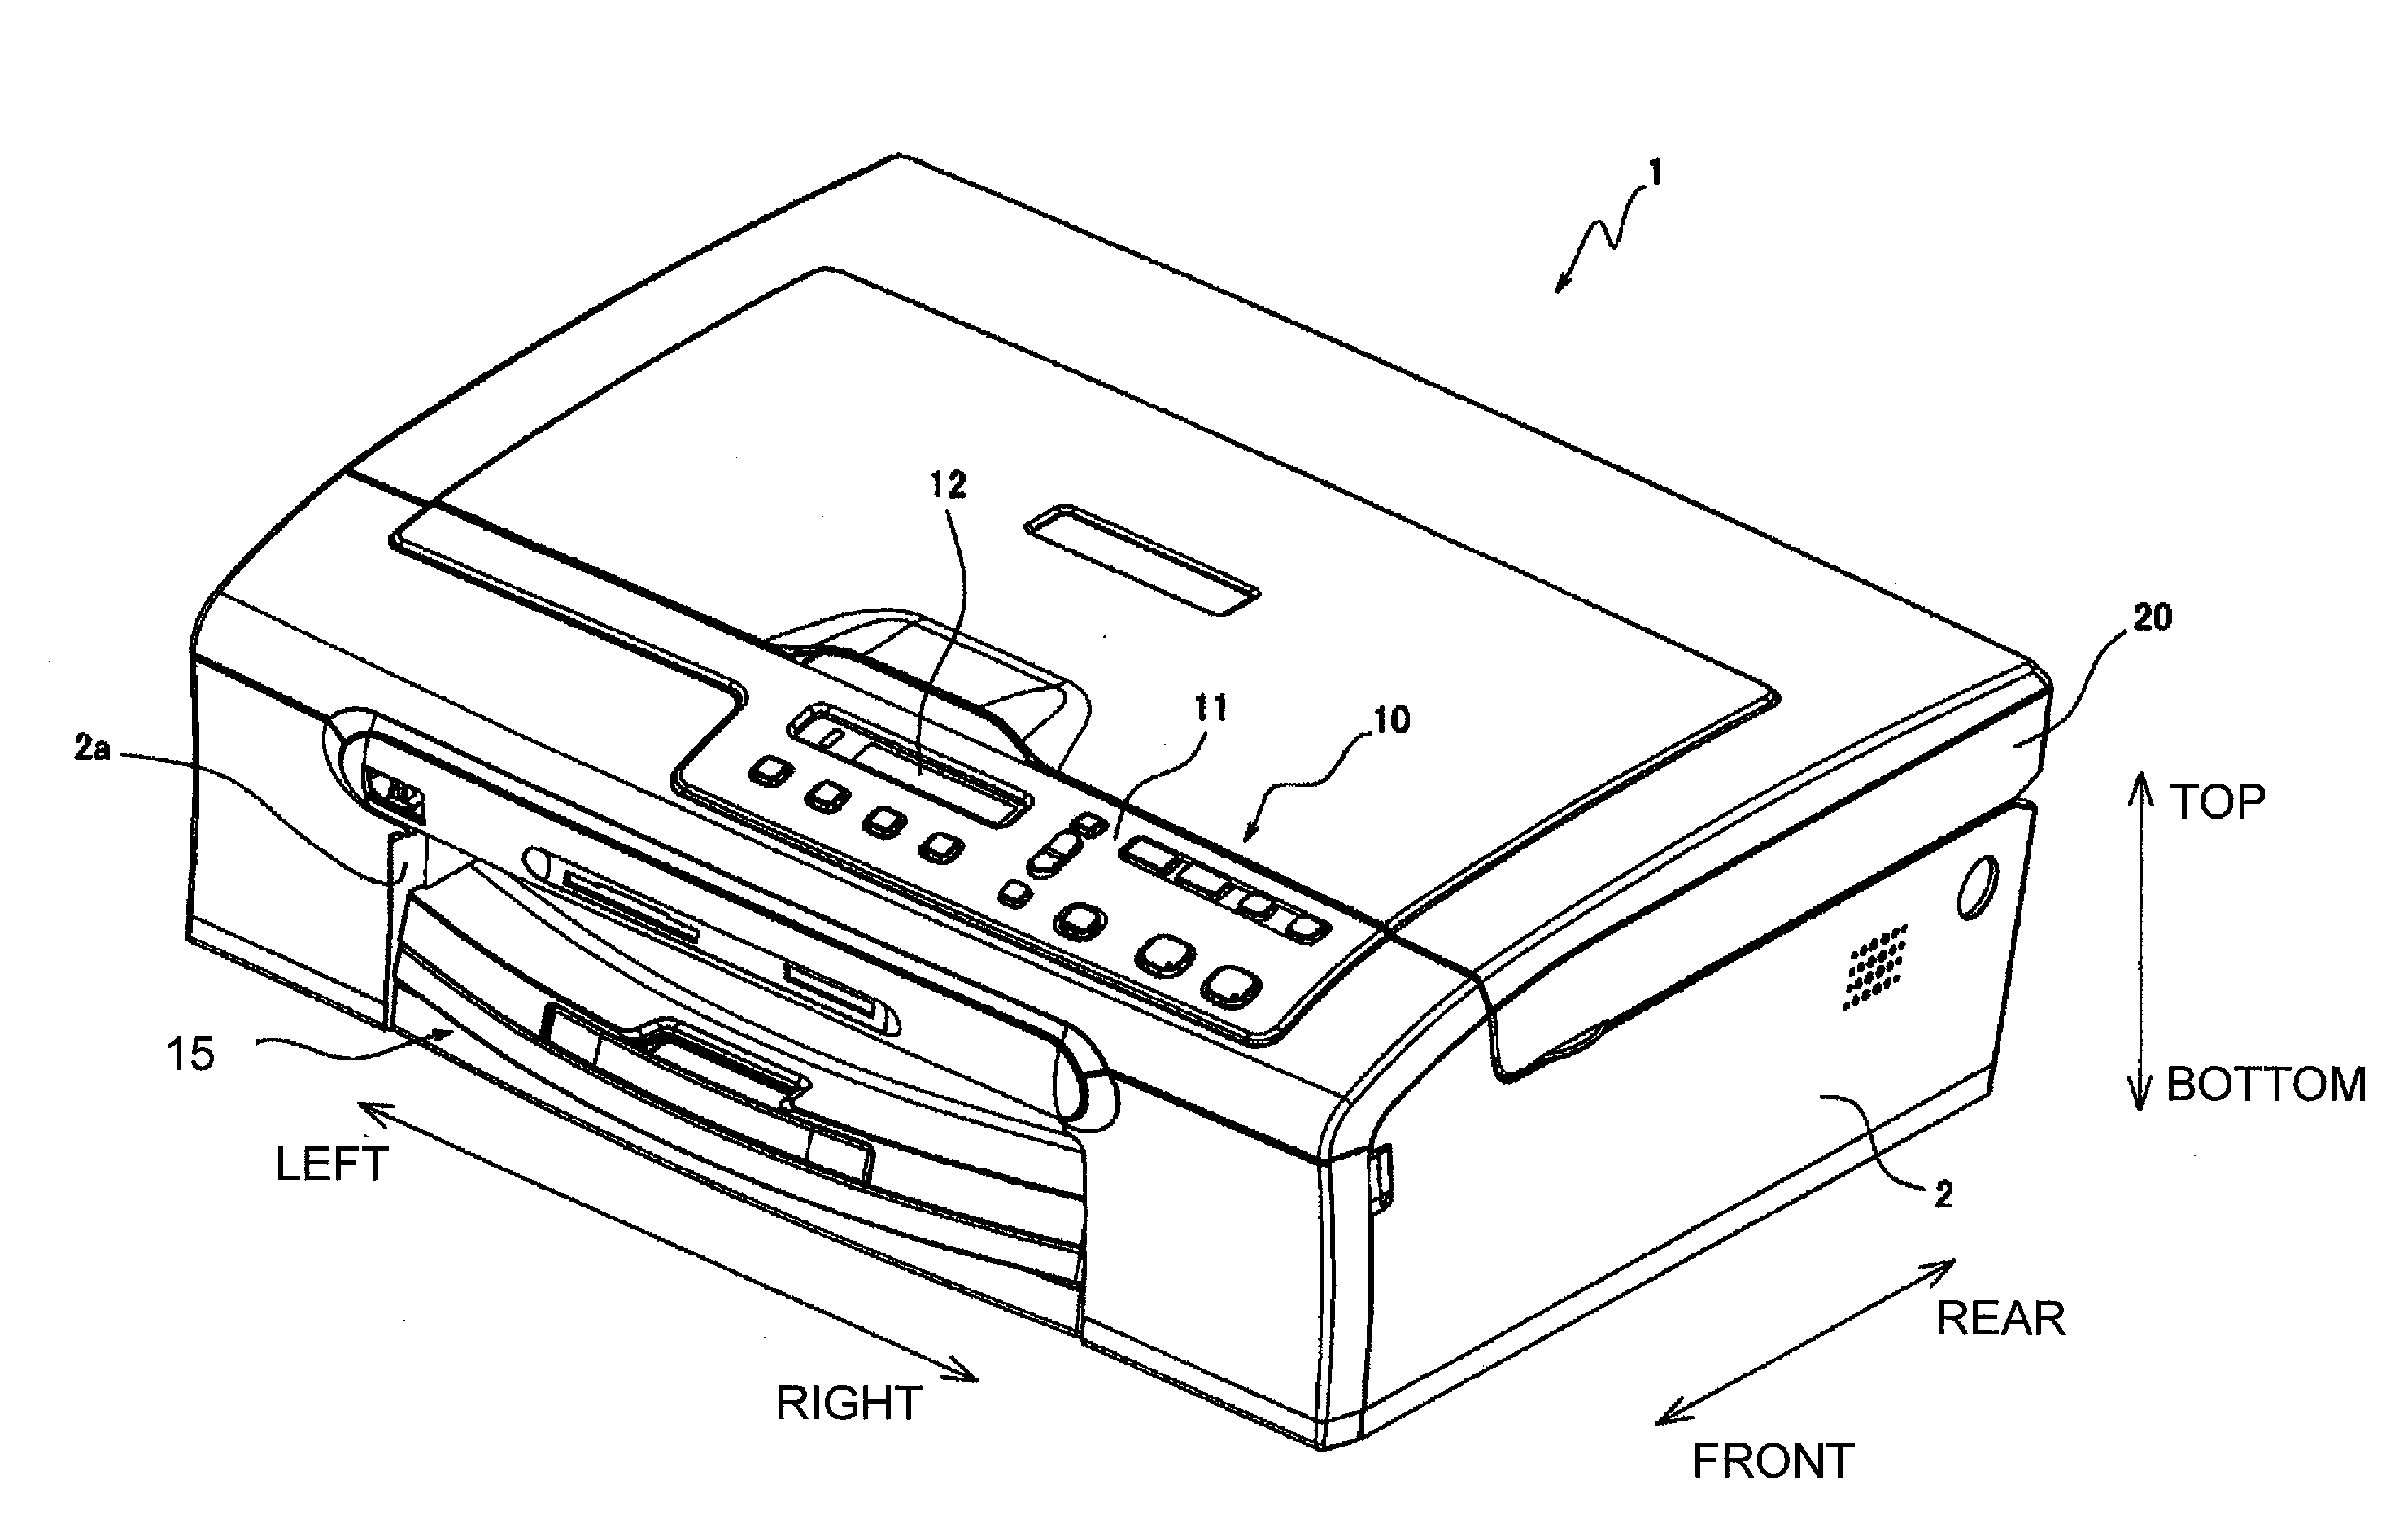 Supply Tray And Image Forming Apparatus For Use Therewith